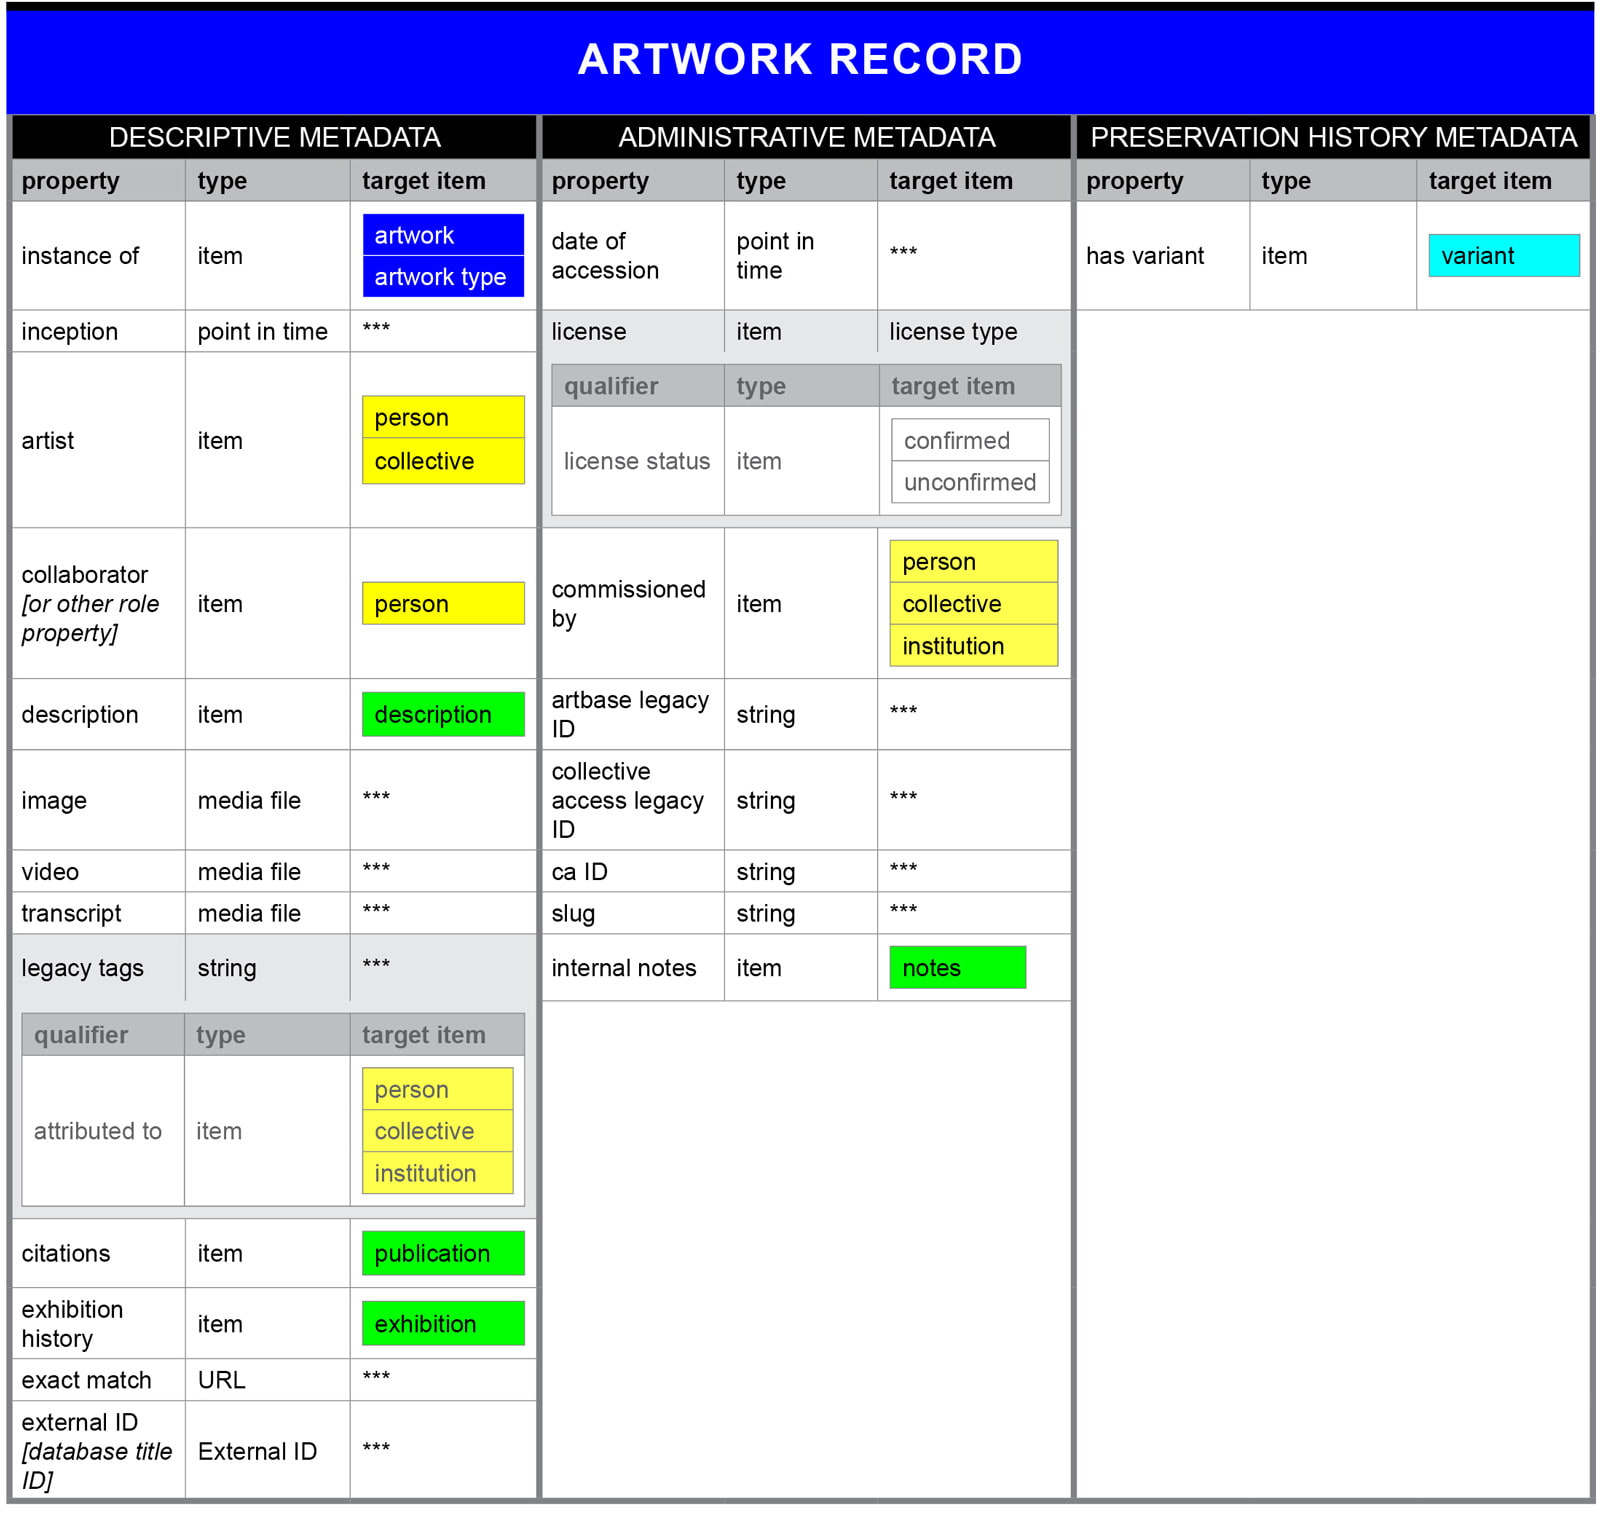 A table depicting the data model for artwork records in the ArtBase.